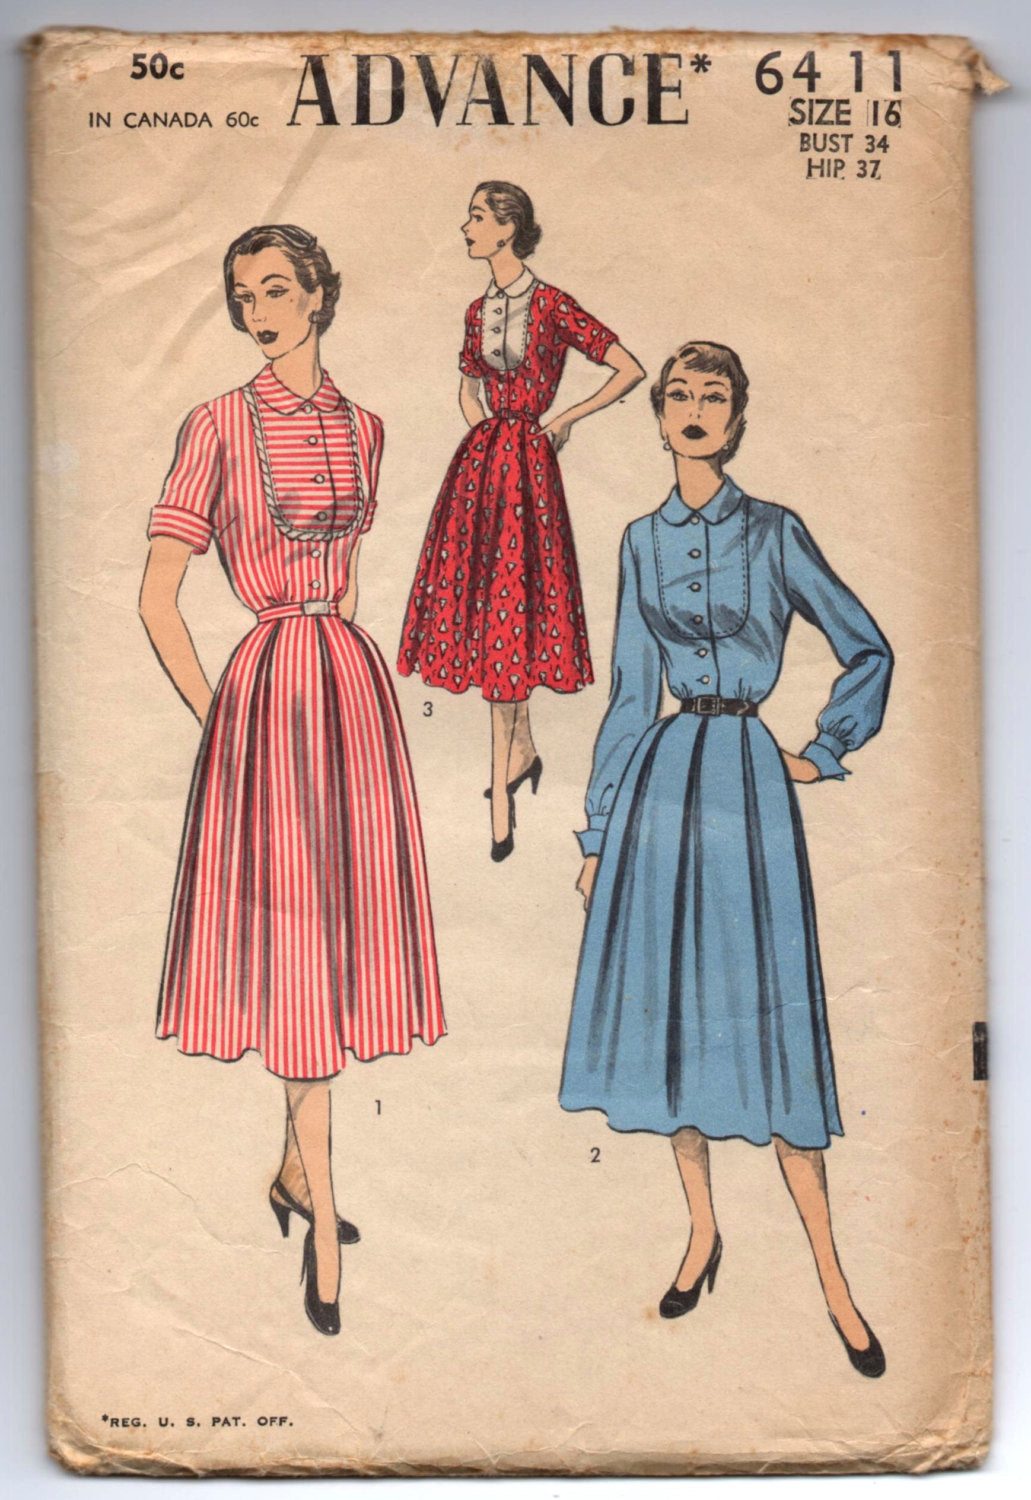 1950's Advance One-Piece Dress with contrast front Pattern - Bust 34